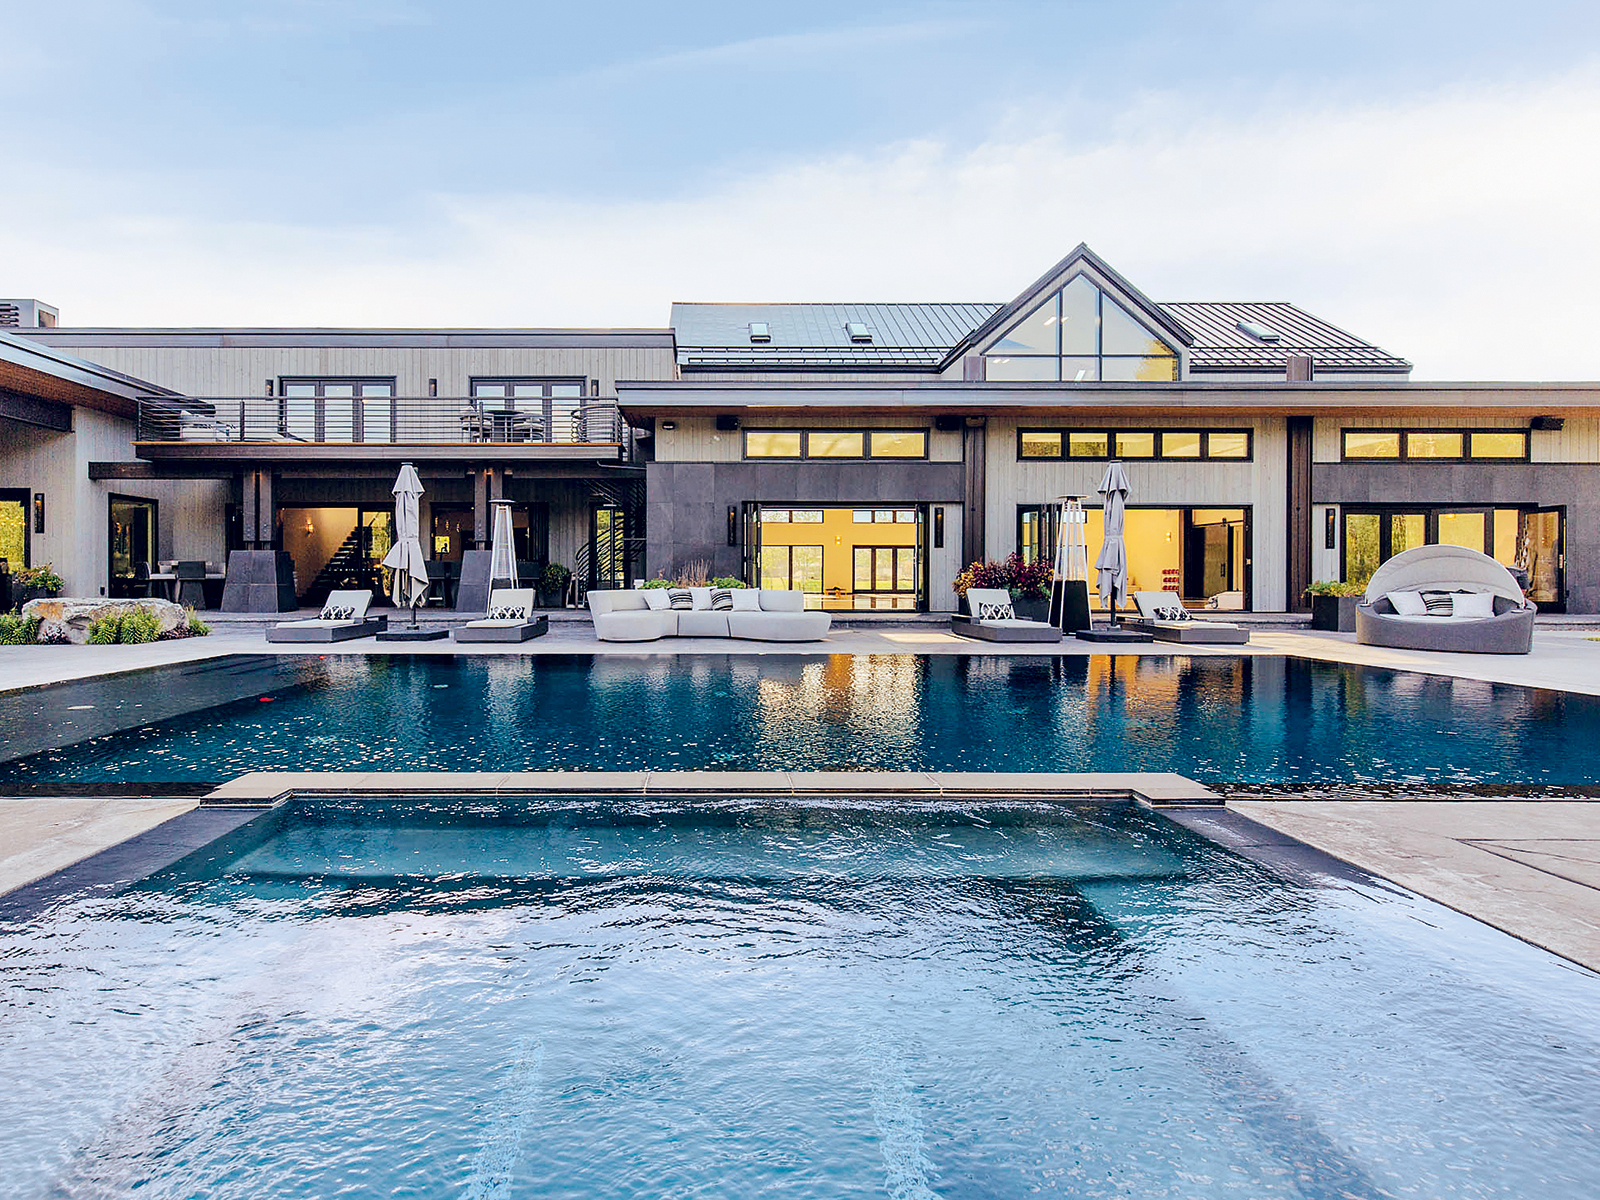 A vast outdoor pool is one of the water features at this Montana home